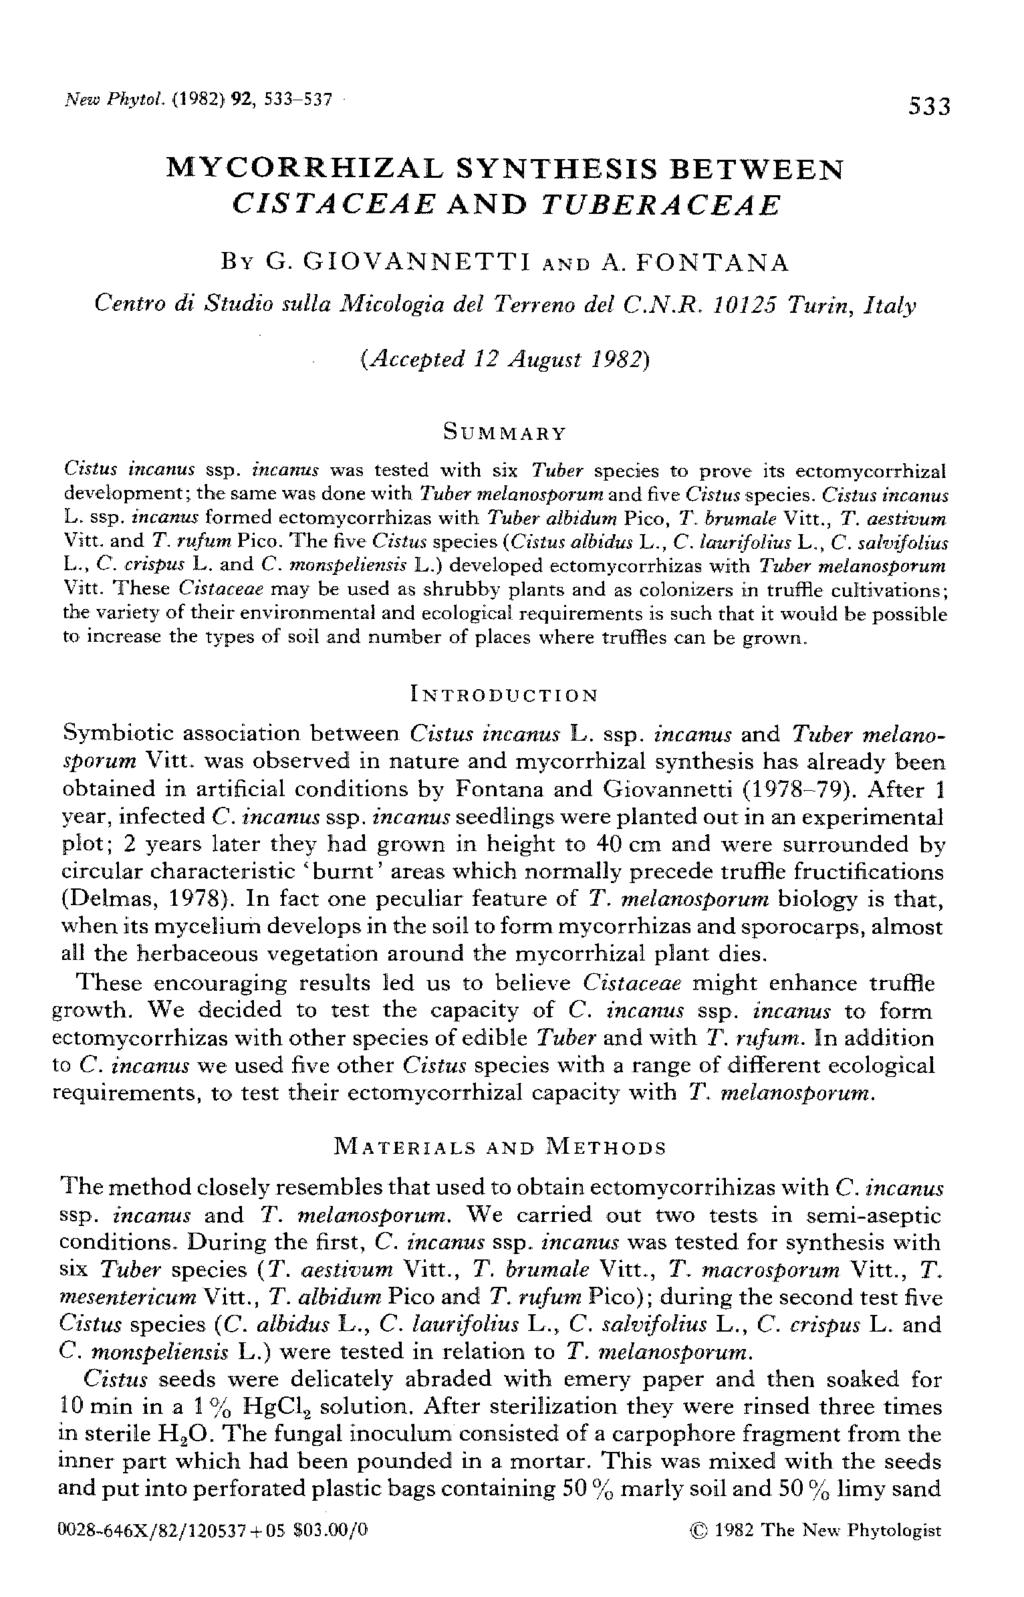 New Phytol. (1982) 92, 533-537 MYCORRHIZAL SYNTHESIS BETWEEN CISTACEAE ANJy TUBERACEAE BY G. GIOVANNETTJ AND A. FONTANA Centra di Studio sulla Micologia del Terreno del C.N.R. 10125 Turin, Italy (Accepted 12 August 1982) SUMMARY Cistus incanus ssp.